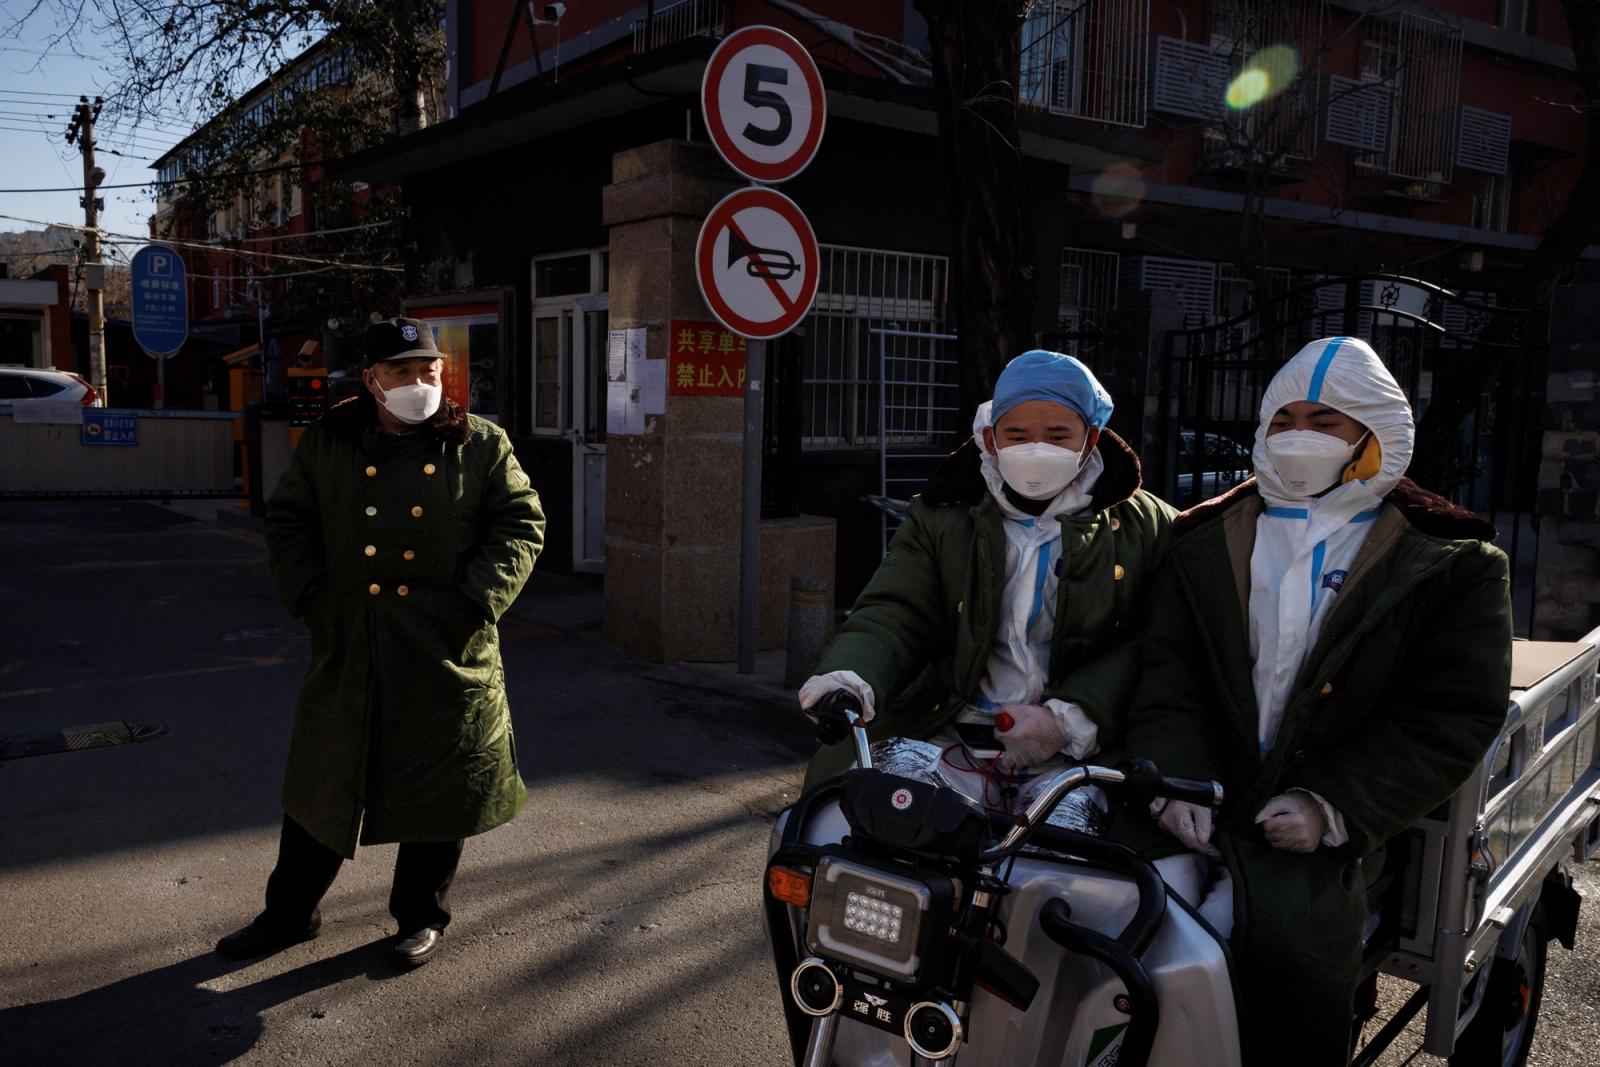 Pandemic prevention workers in protective suits ride an electric vehicle as coronavirus disease (COVID-19) outbreaks continue in Beijing